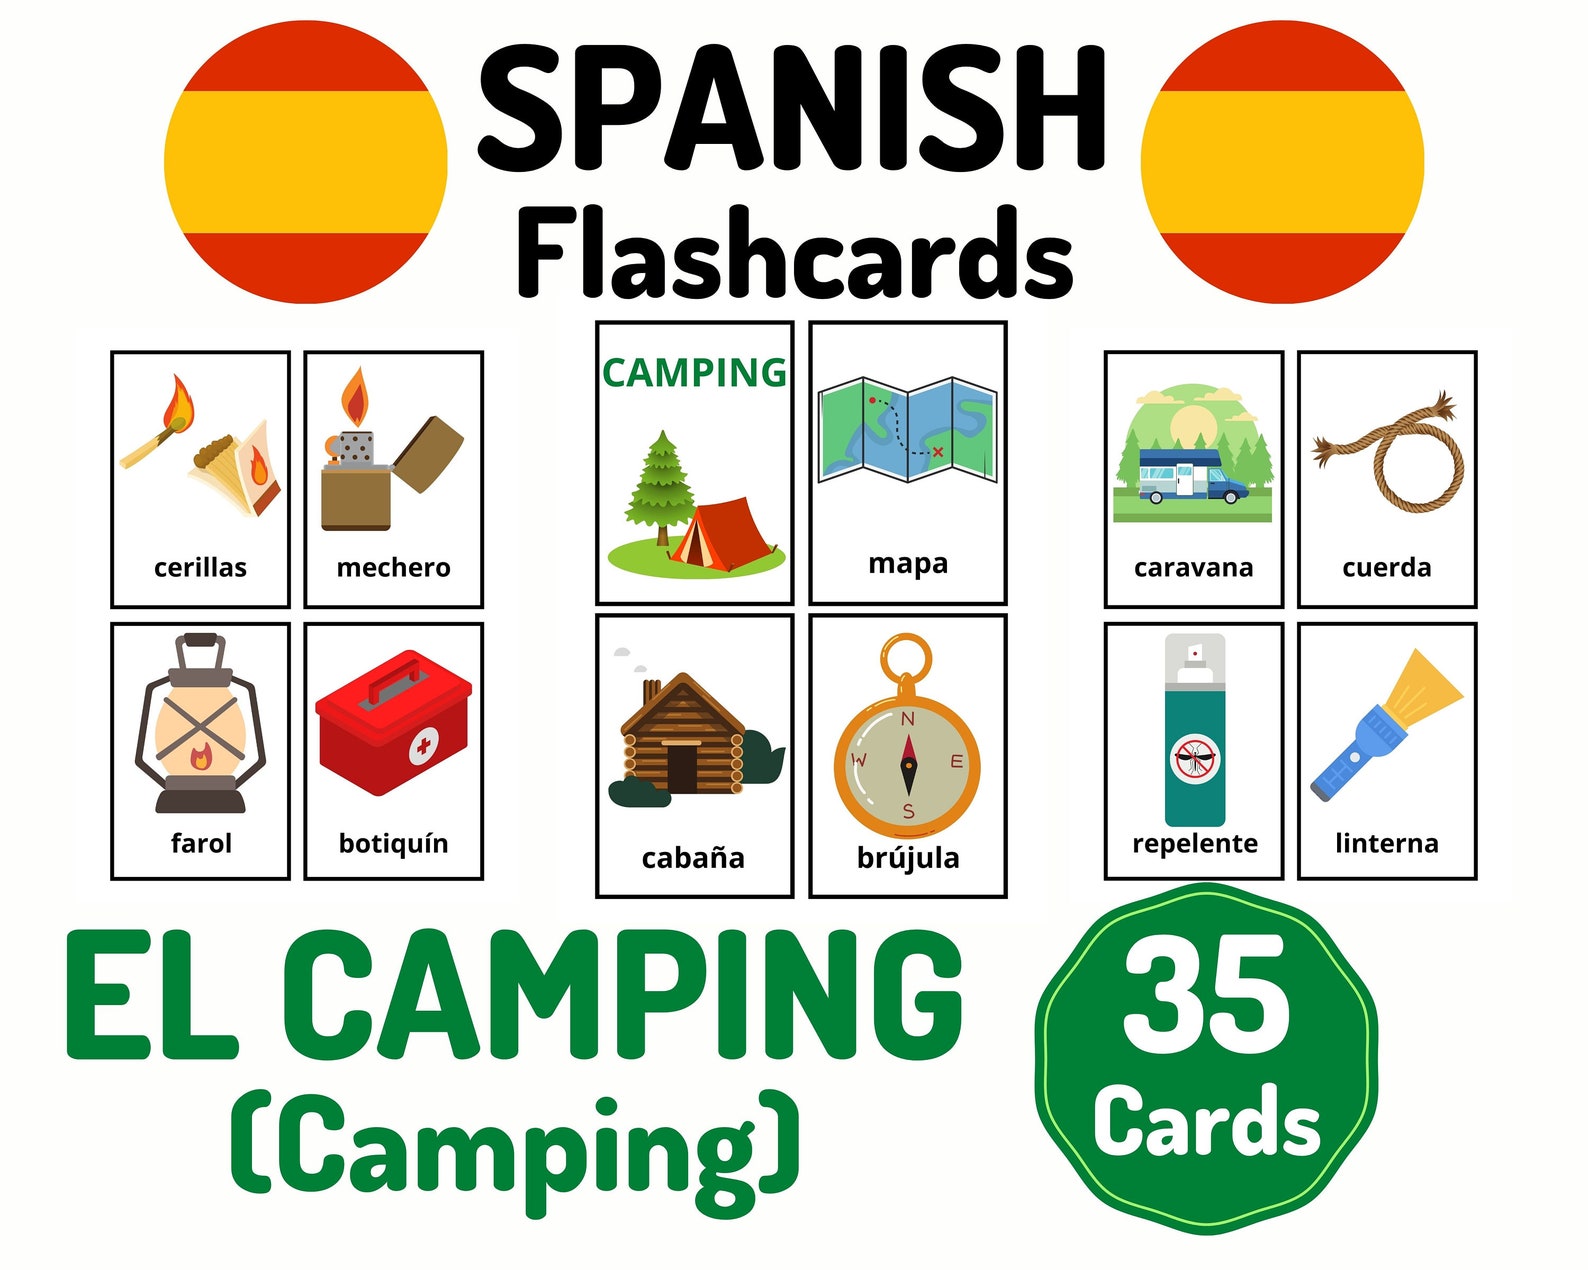 Camping vocabulary. Camping Flashcards for Kids. Camping Vocabulary Flashcards. Flashcards incredible English 3 Flashcards Camping.